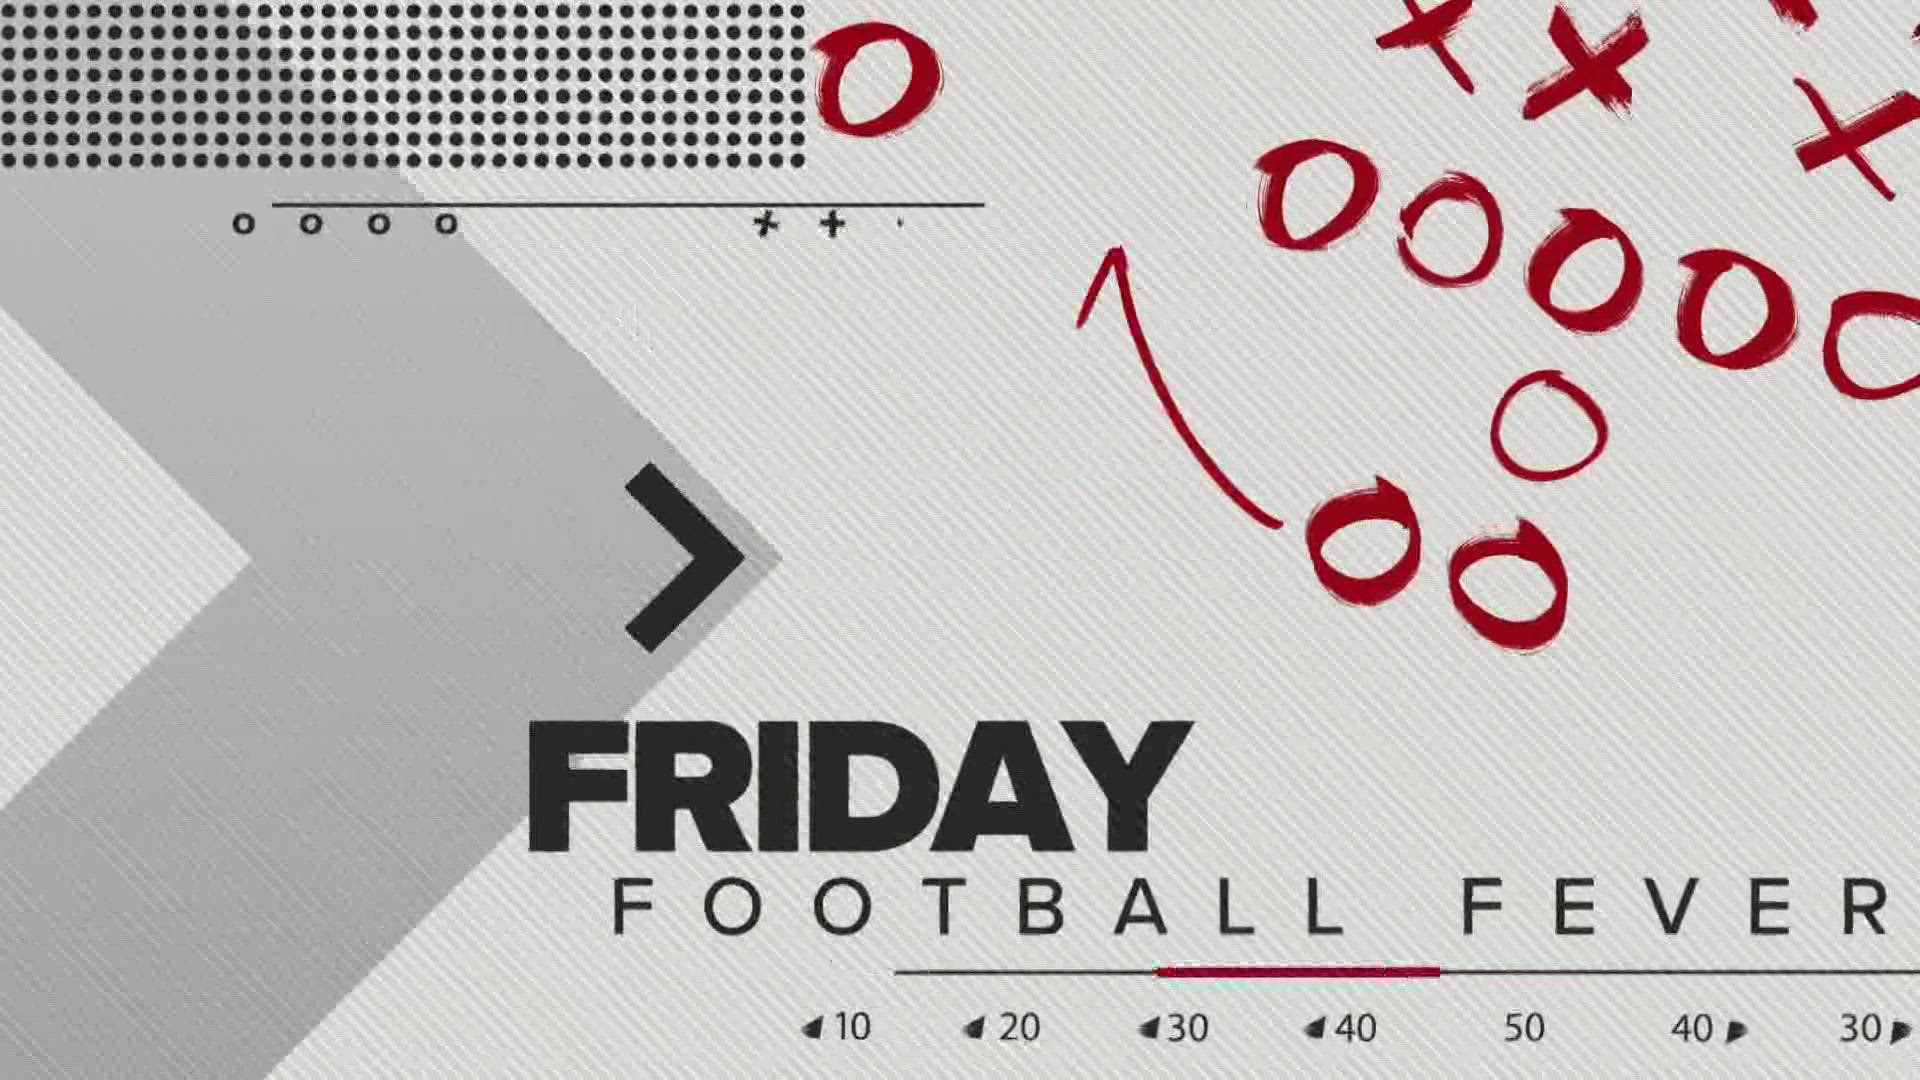 Did your team win? Check out all the Friday Football Fever highlights, scores, touchdowns, and more!